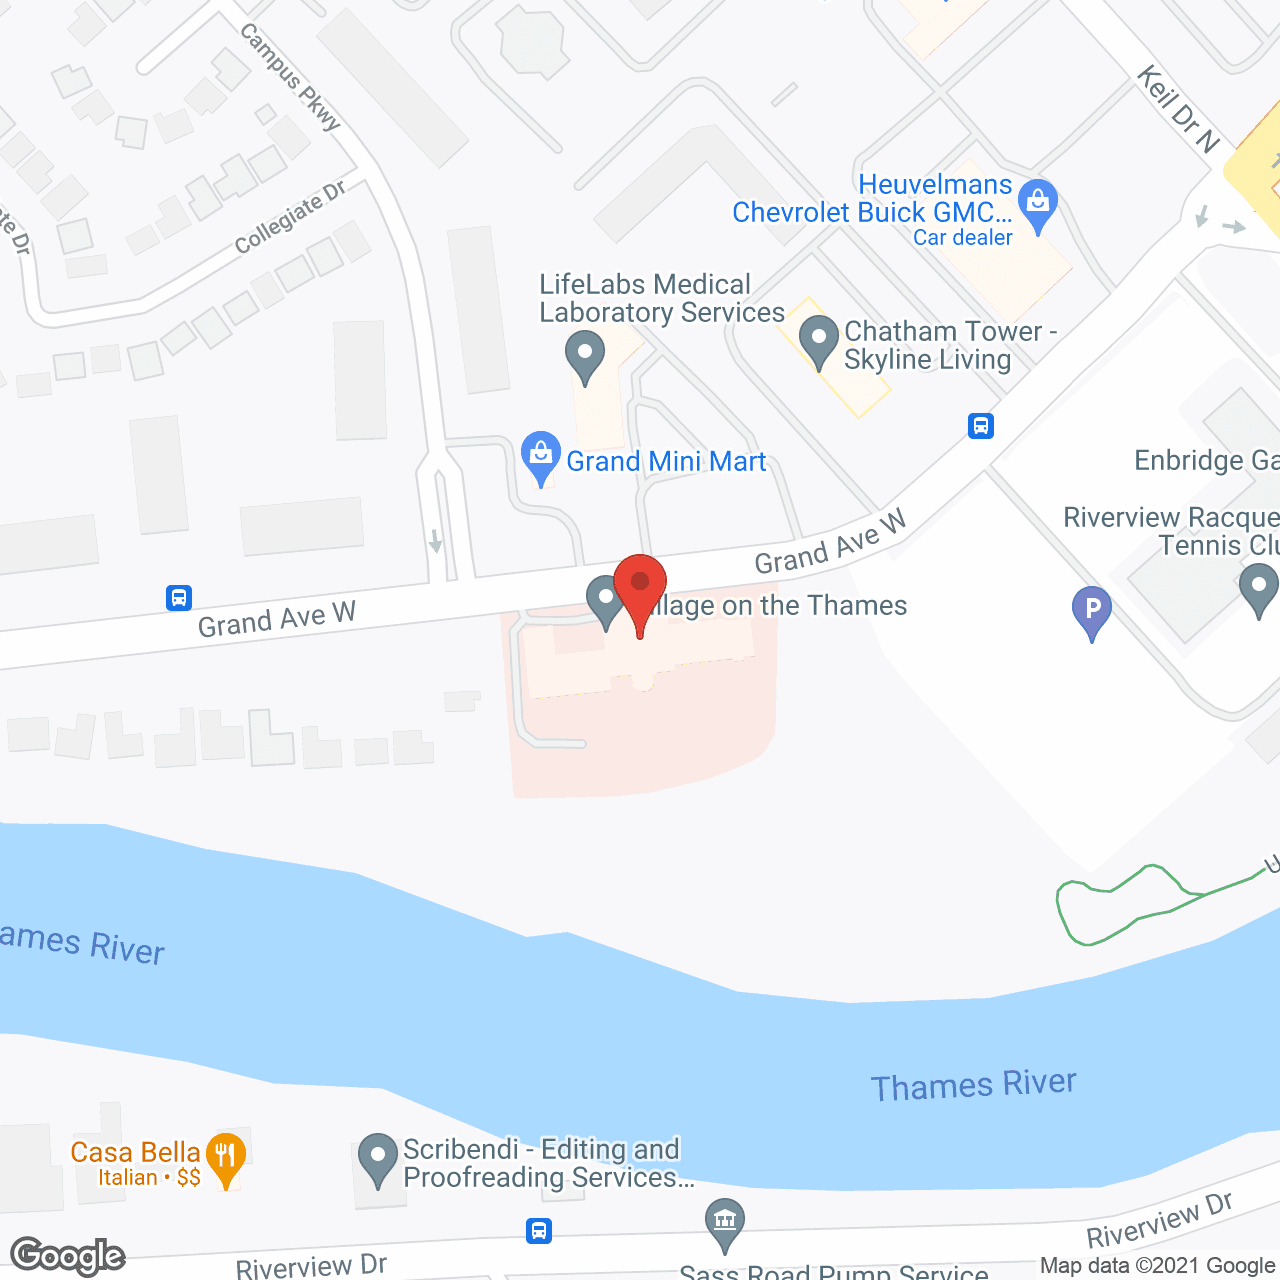 Residence on the Thames in google map